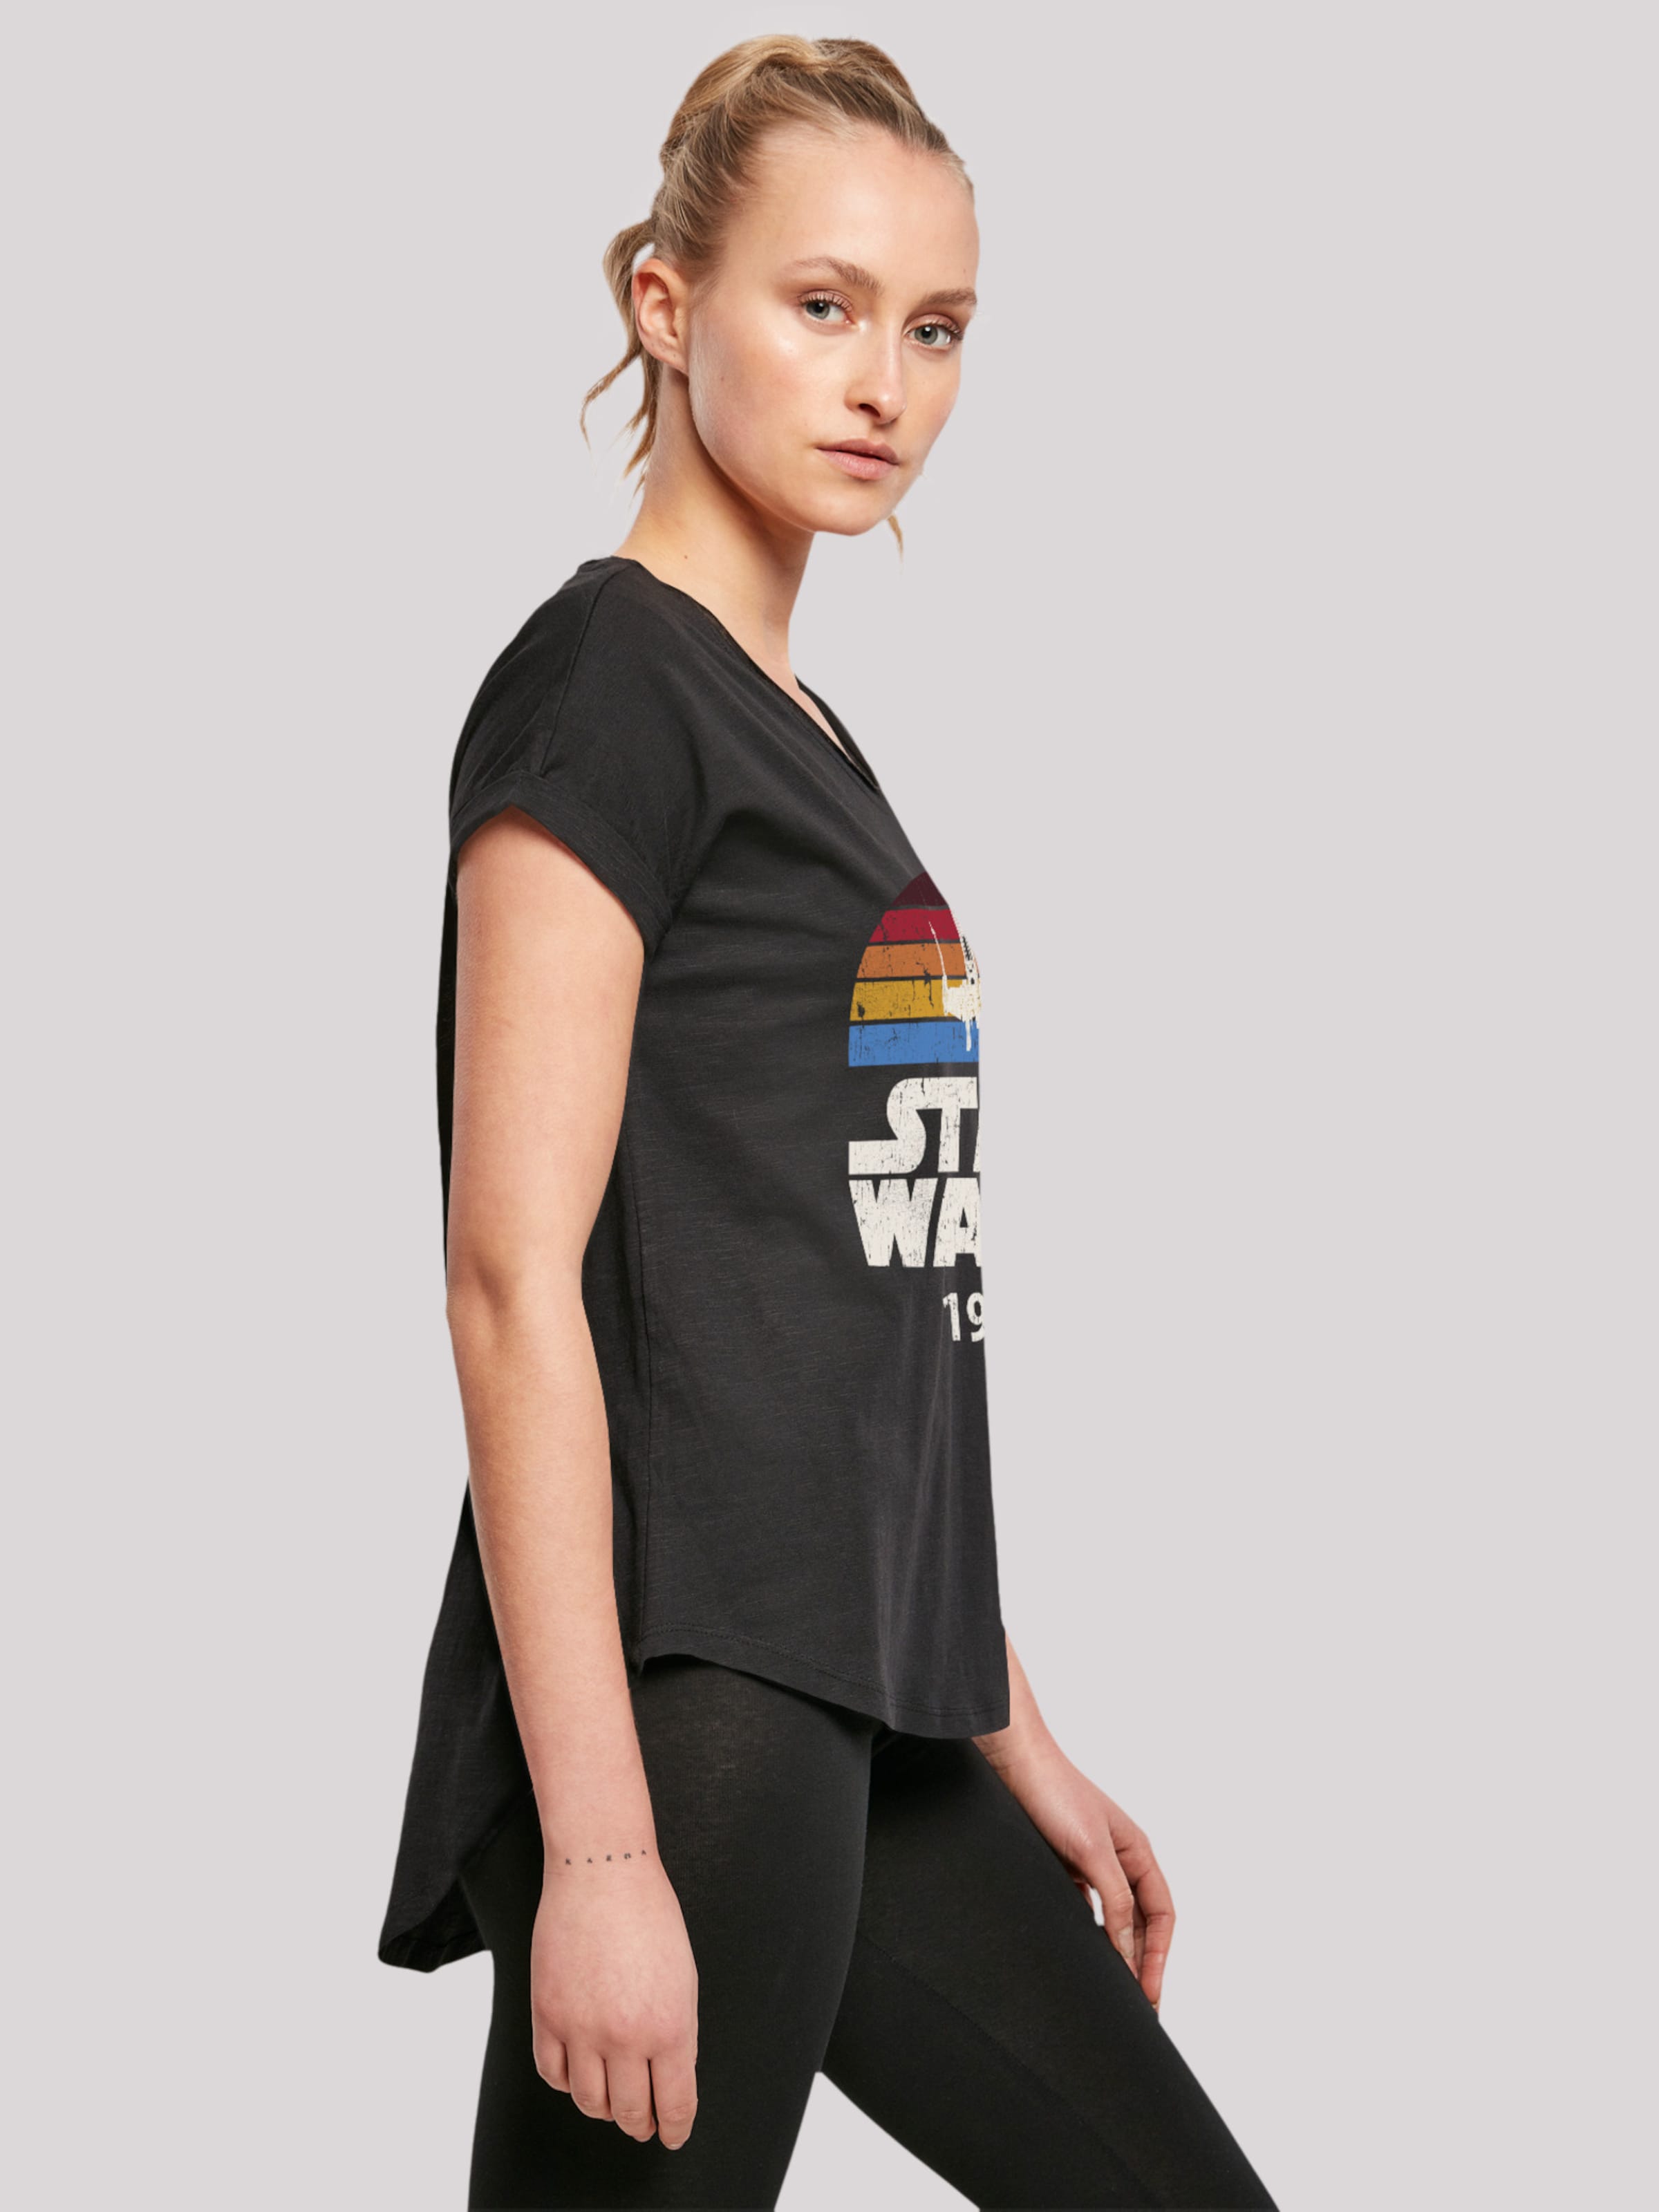 F4NT4STIC in Shirt Trip | YOU 1977\' Wars Black ABOUT X-Wing \'Star